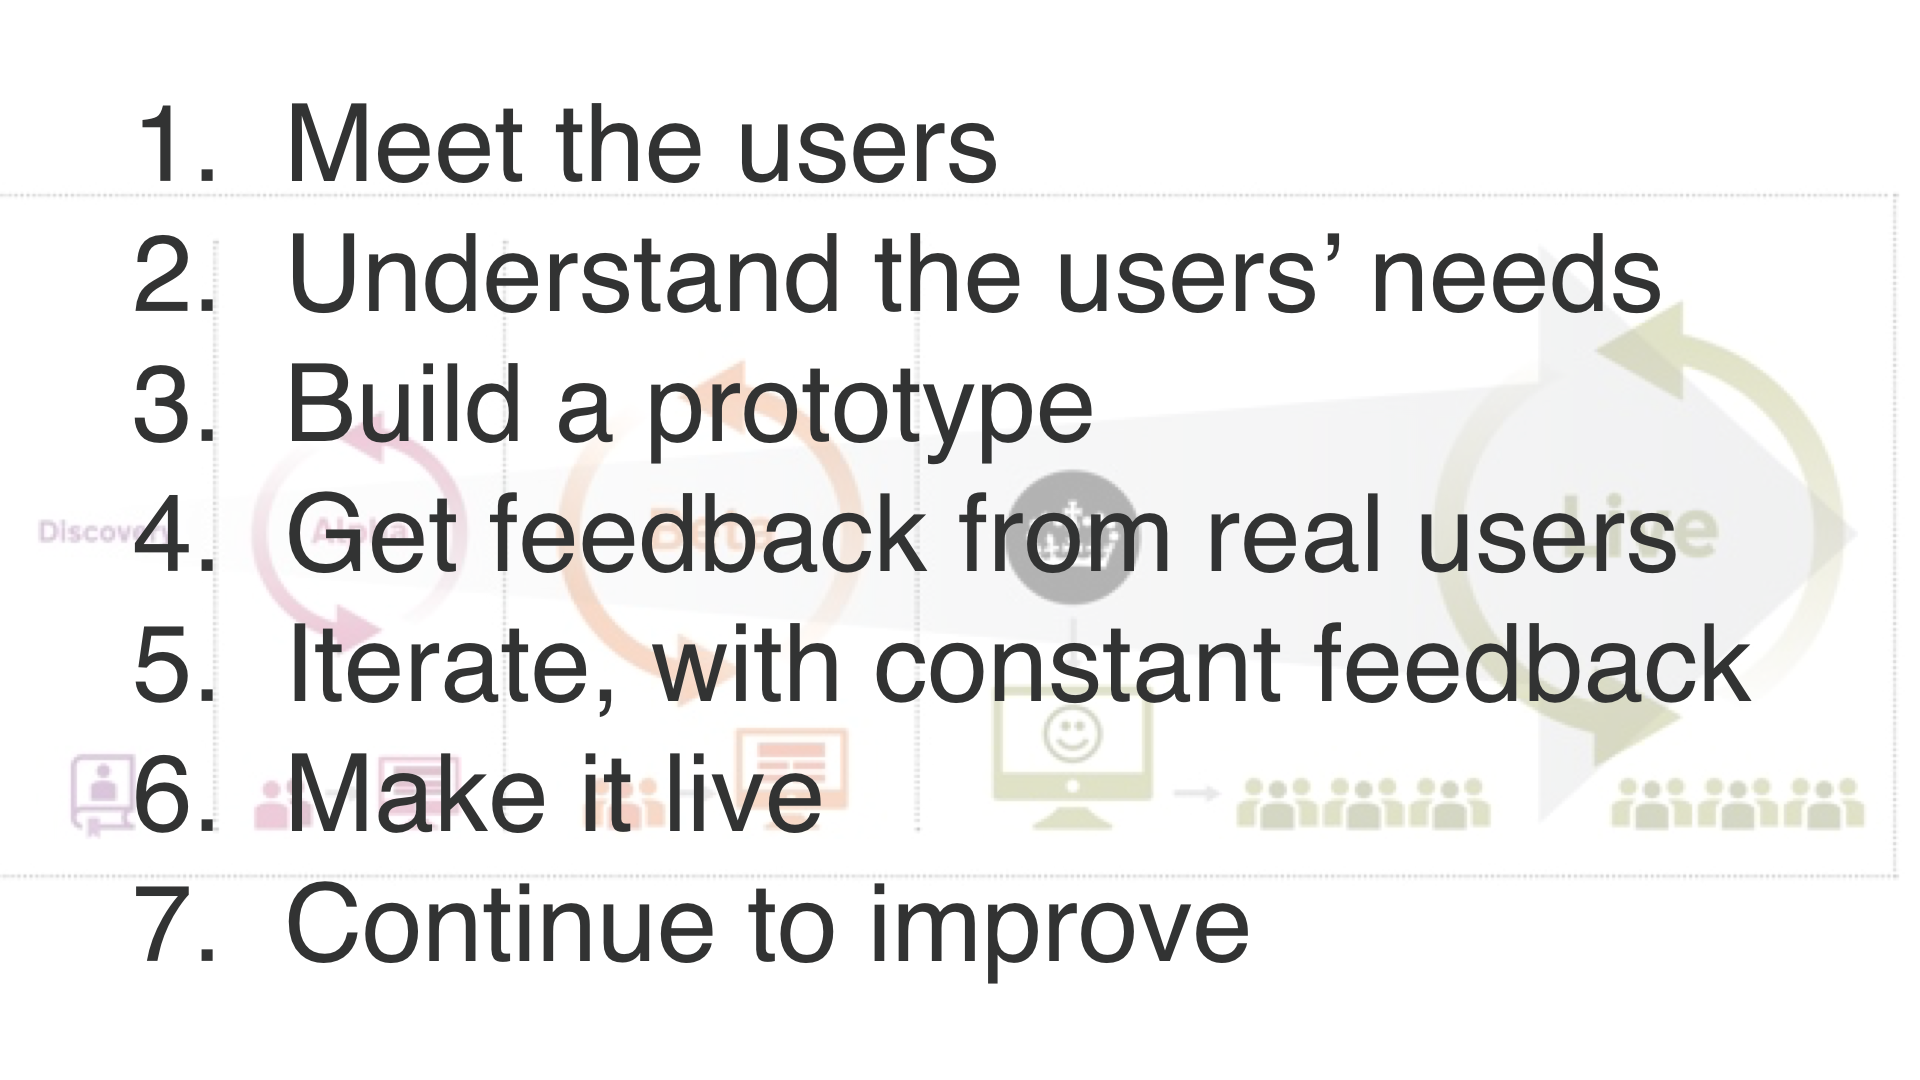 "1. meet the users. 2. understand their needs. 3. build a prototype. 4. get feedback. 5. iterate with constant feedback. 6. make it live. 7. continue to improve"